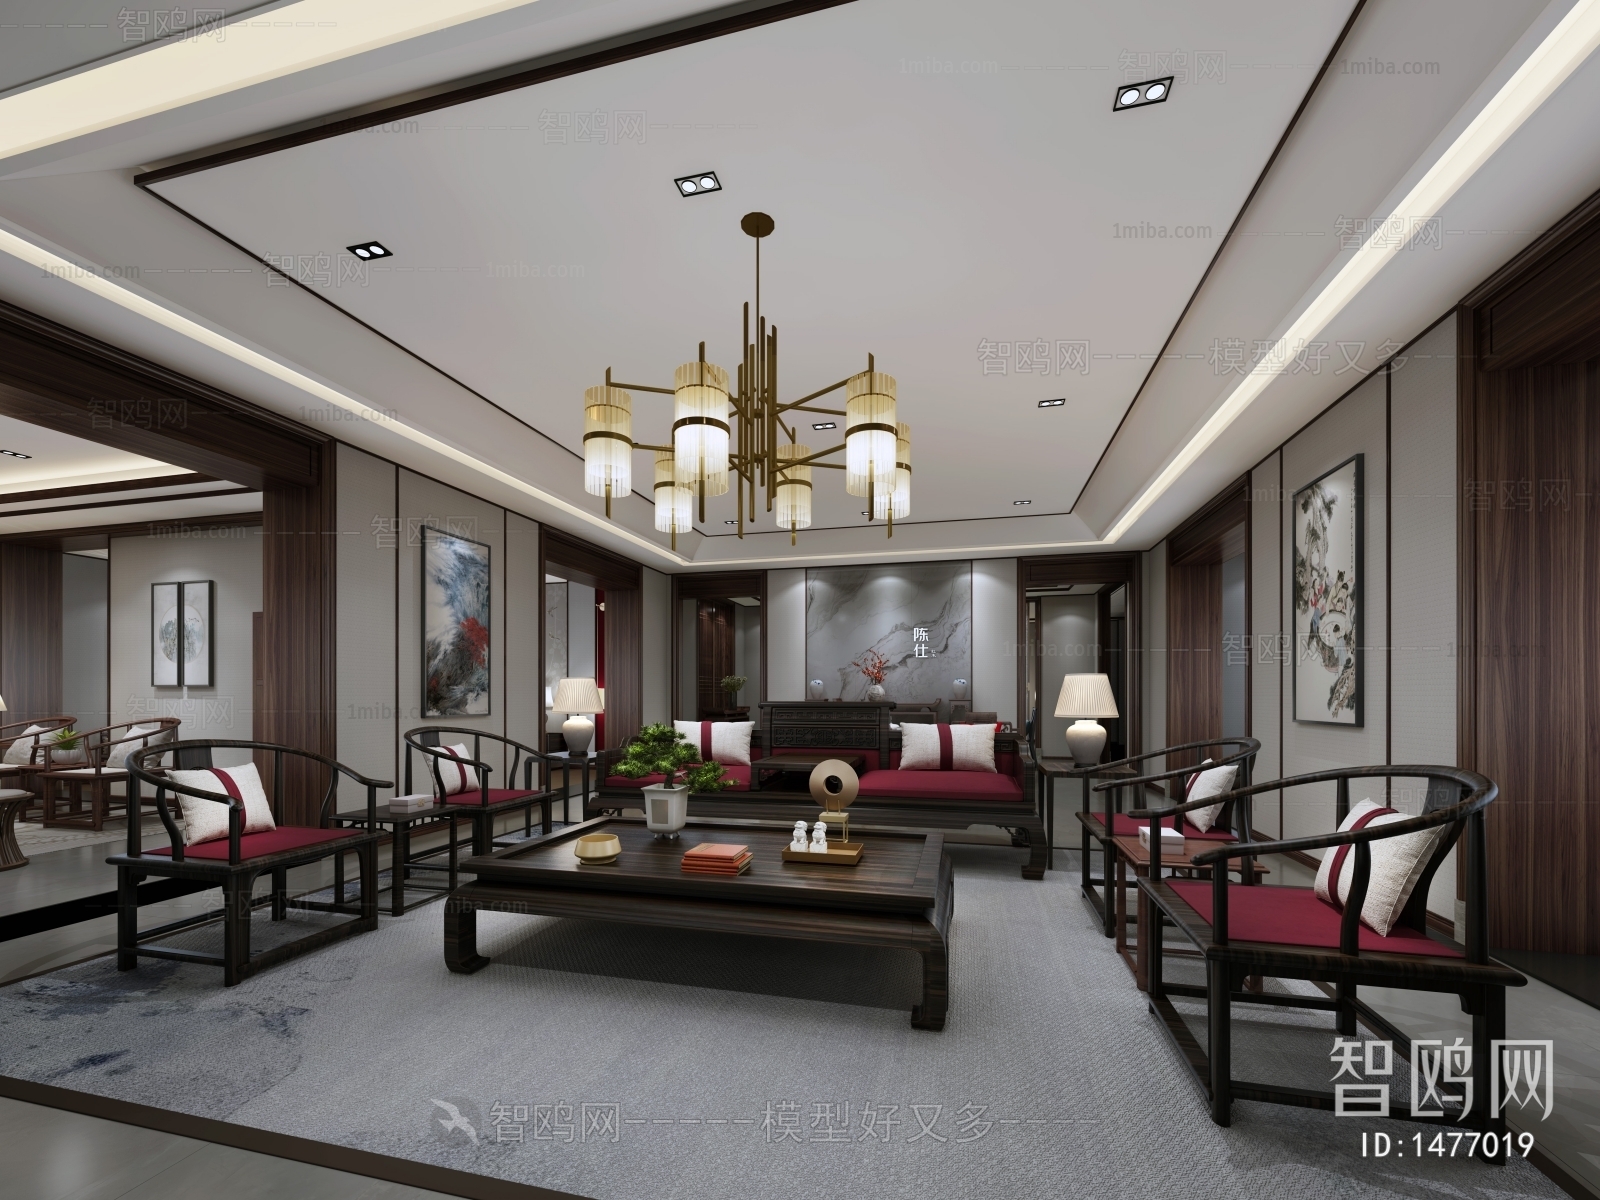 New Chinese Style Furniture Shop